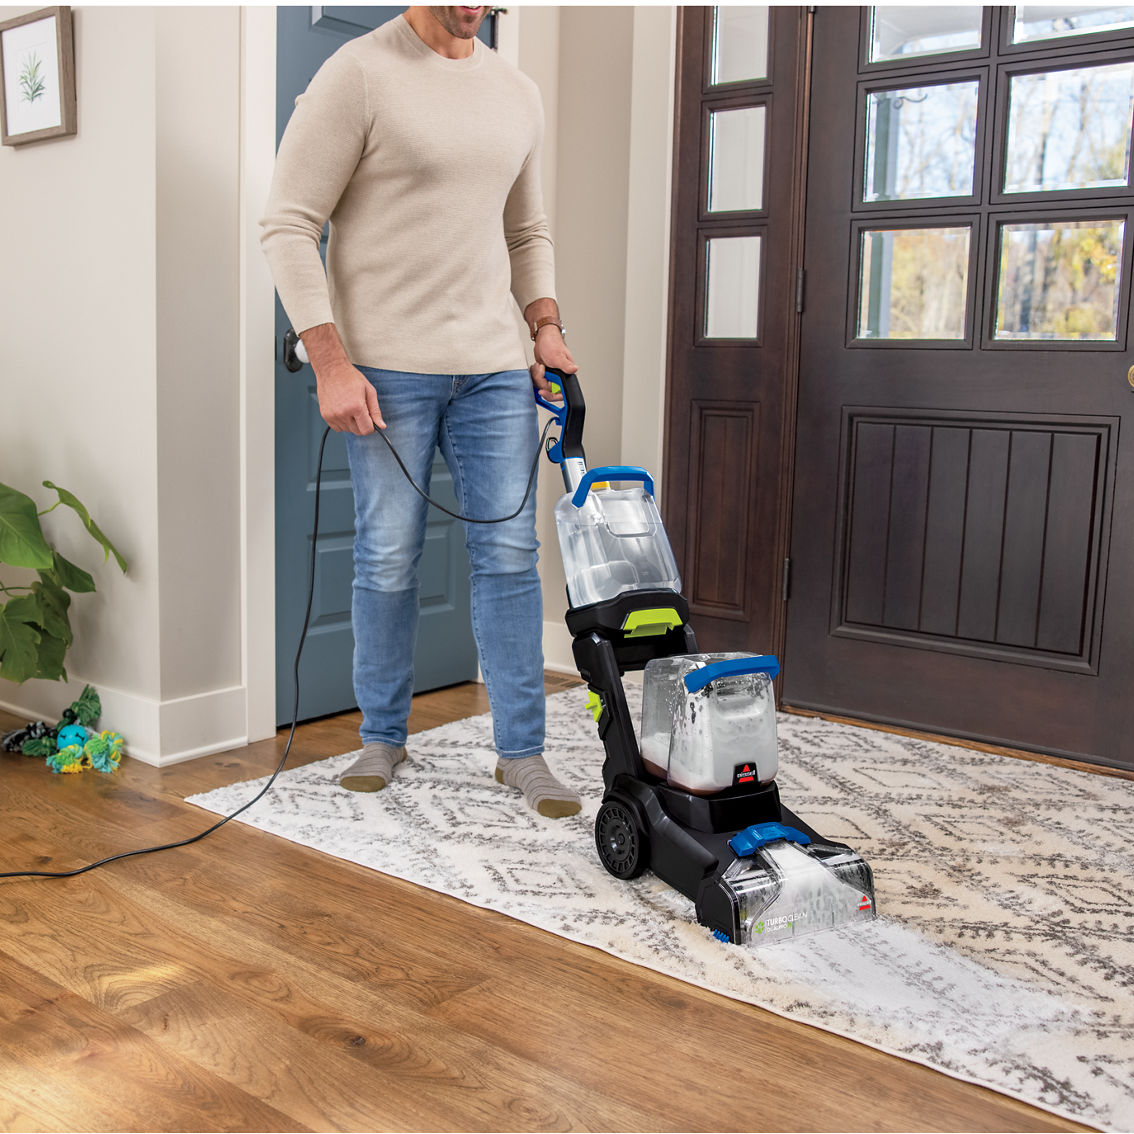 Bissell TurboClean DualPro Pet Carpet Cleaner - Image 9 of 10